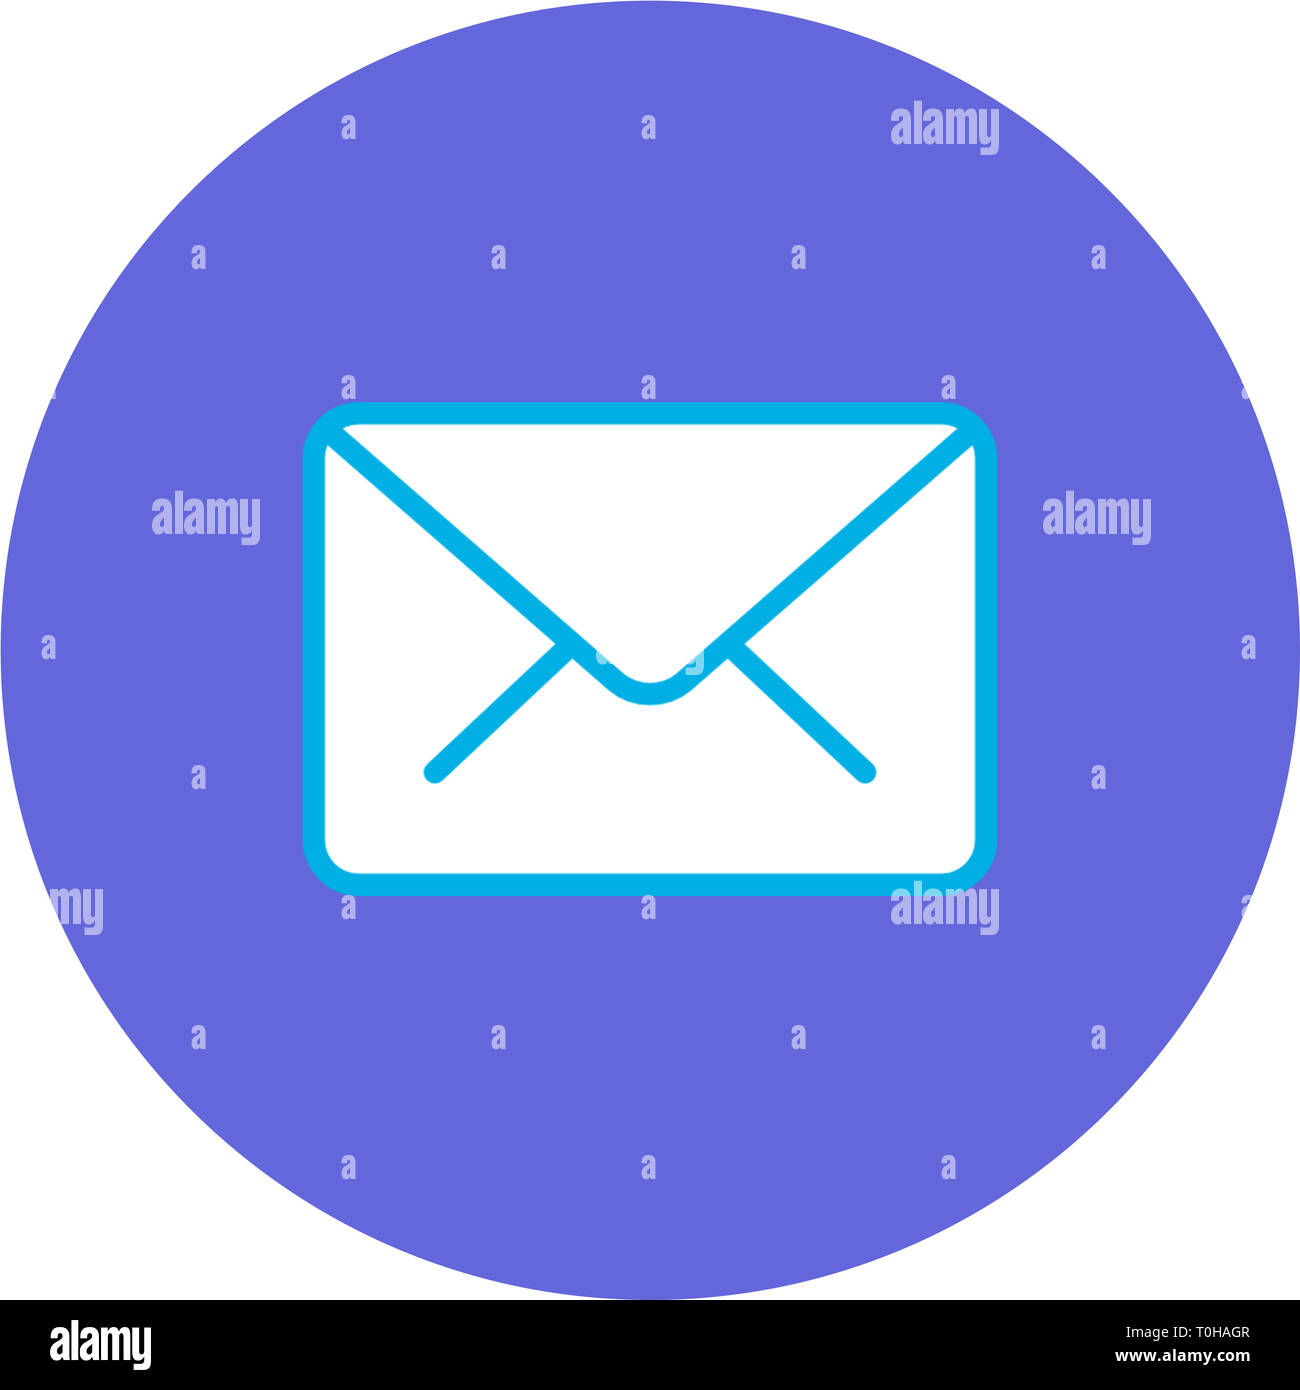 android email icon